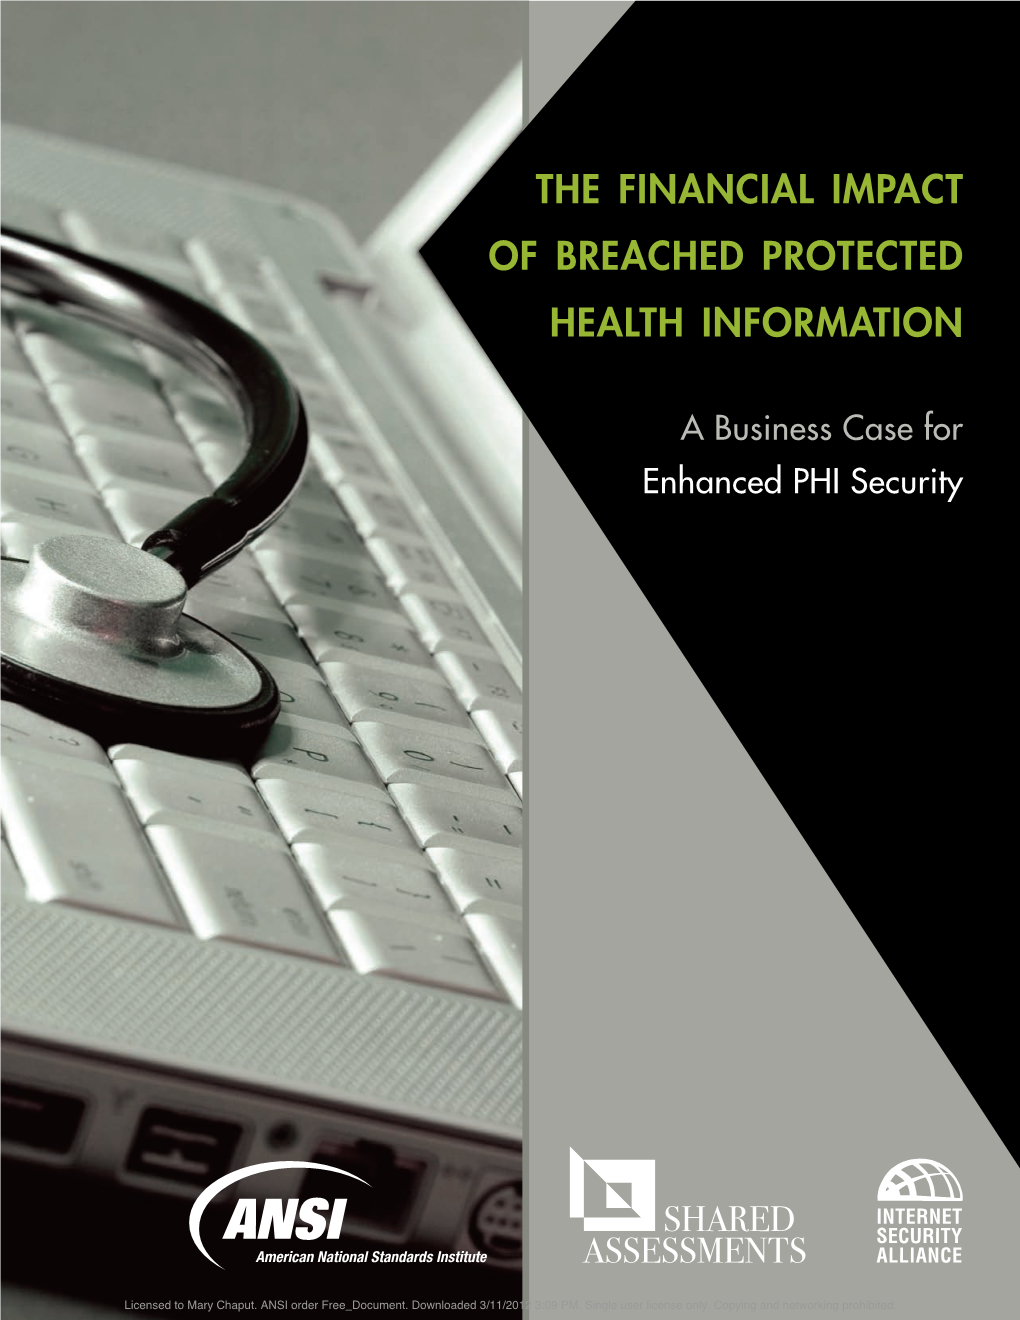 The Financial Impact of Breached Protected Health Information